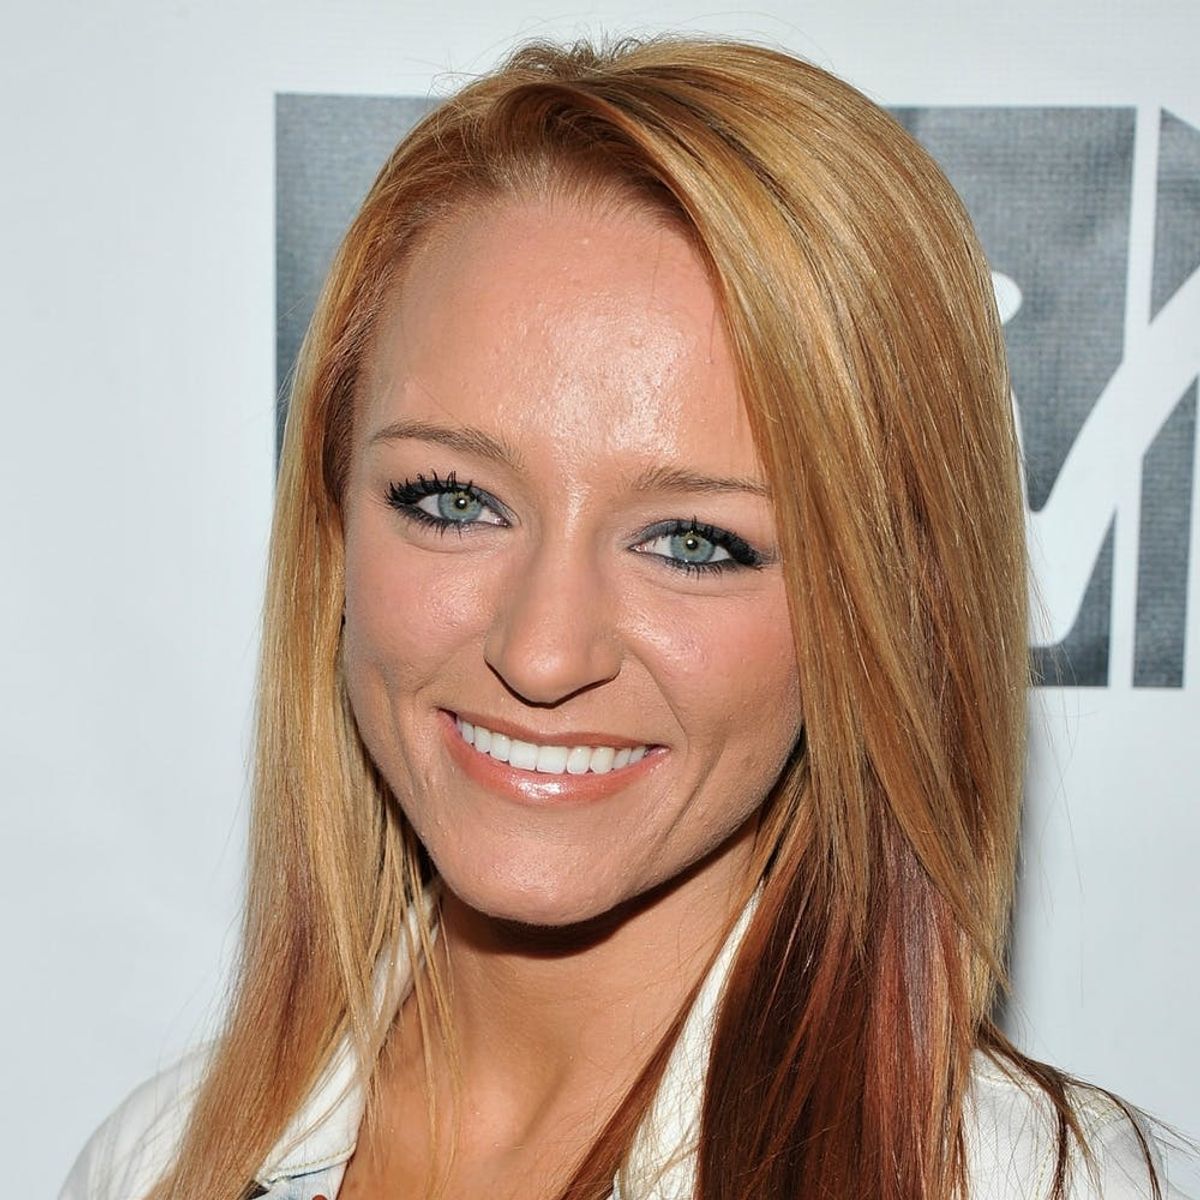 Teen Mom’s Maci Bookout Is Officially a Married Woman